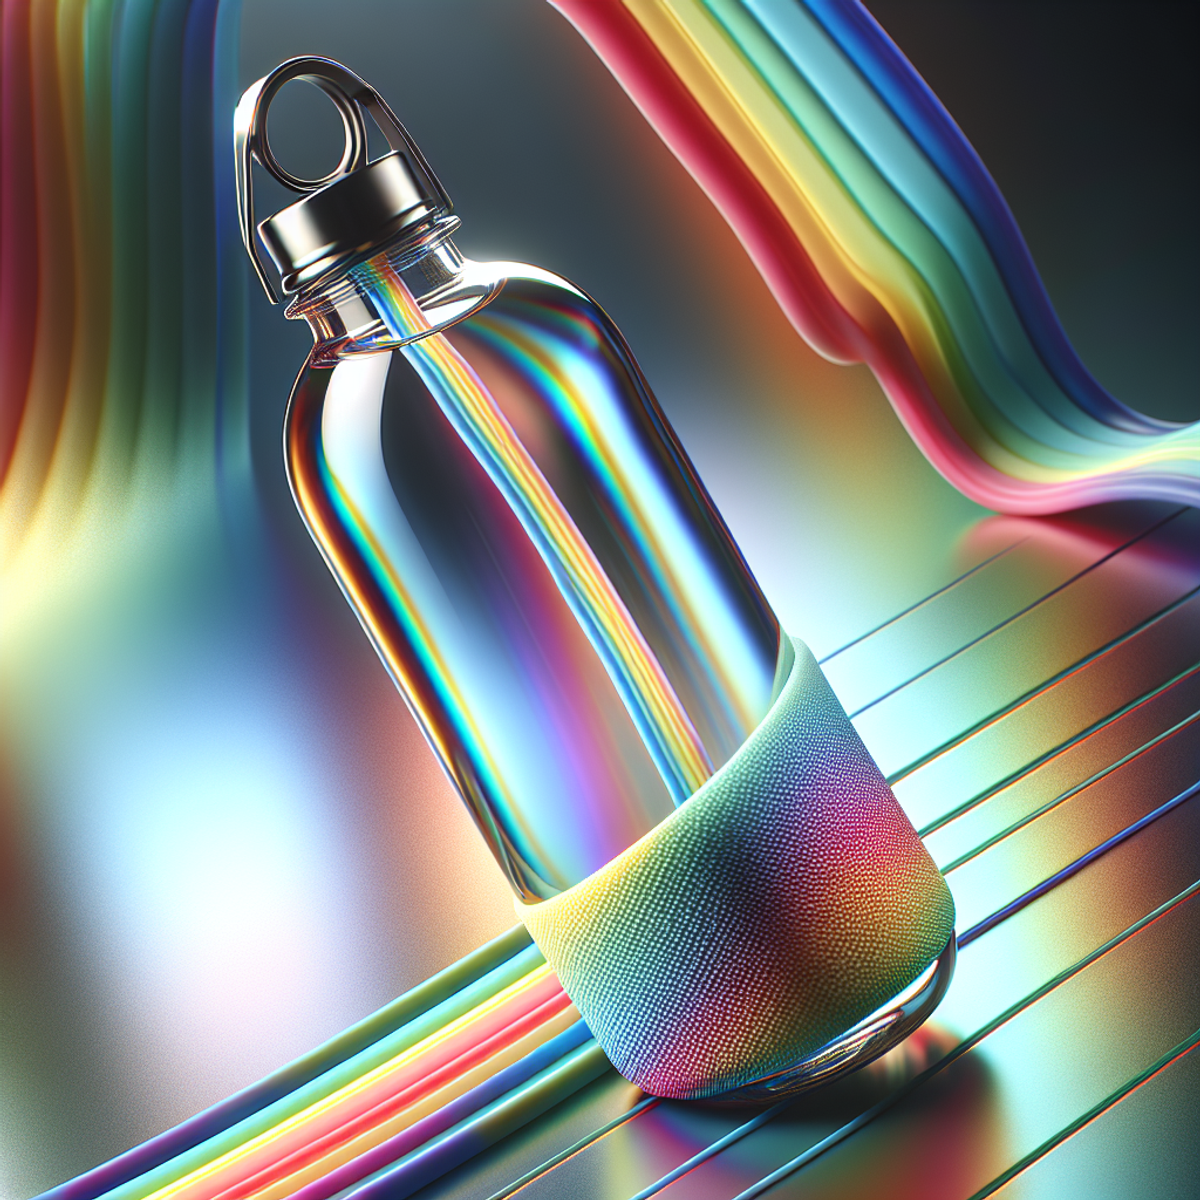 A close-up image of a translucent glass water bottle with a vibrant silicone sleeve, reflecting iridescent rainbow colors.